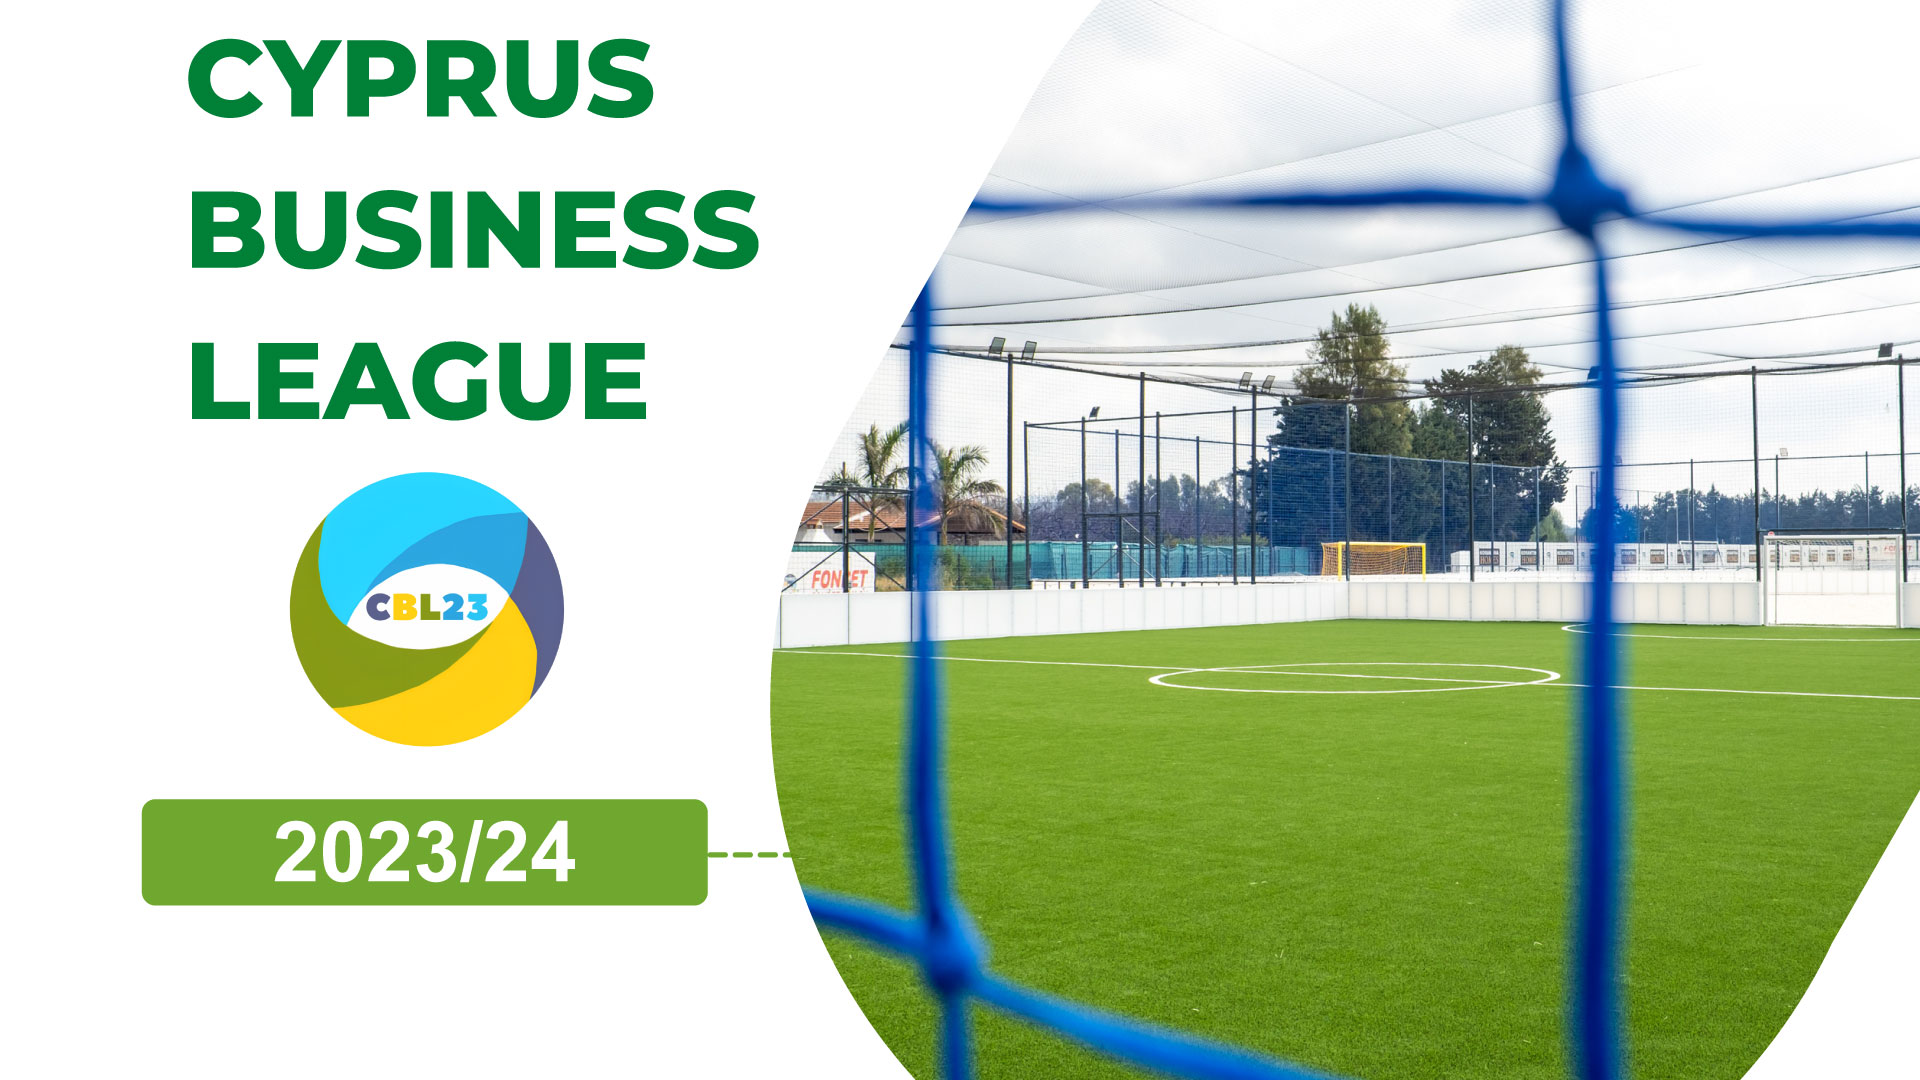 Logo of the Cyprus Business League on a background of a football field, representing the energy and competitive spirit of the tournament.